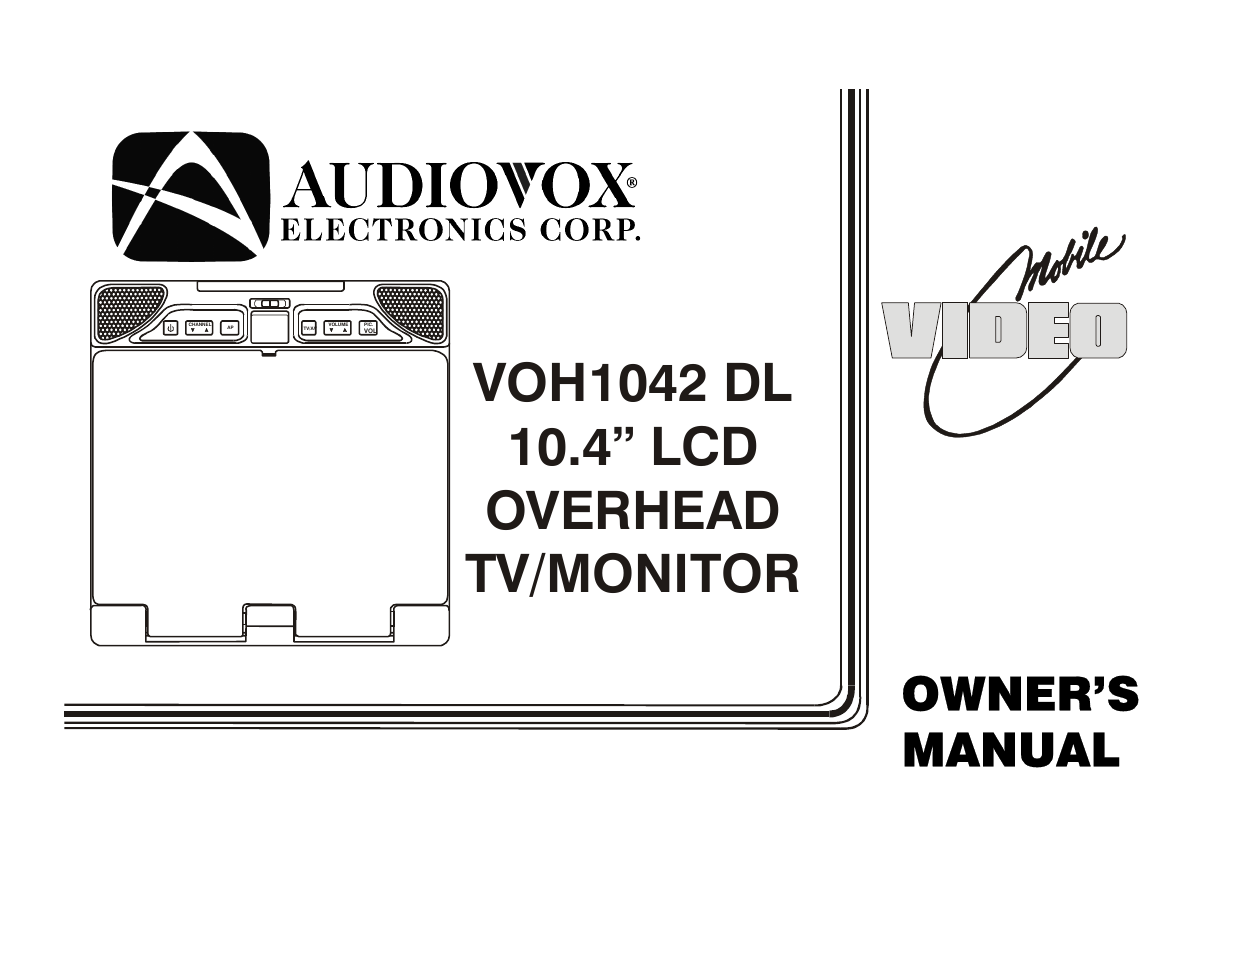 Audiovox VOH1042 DL User Manual | 16 pages